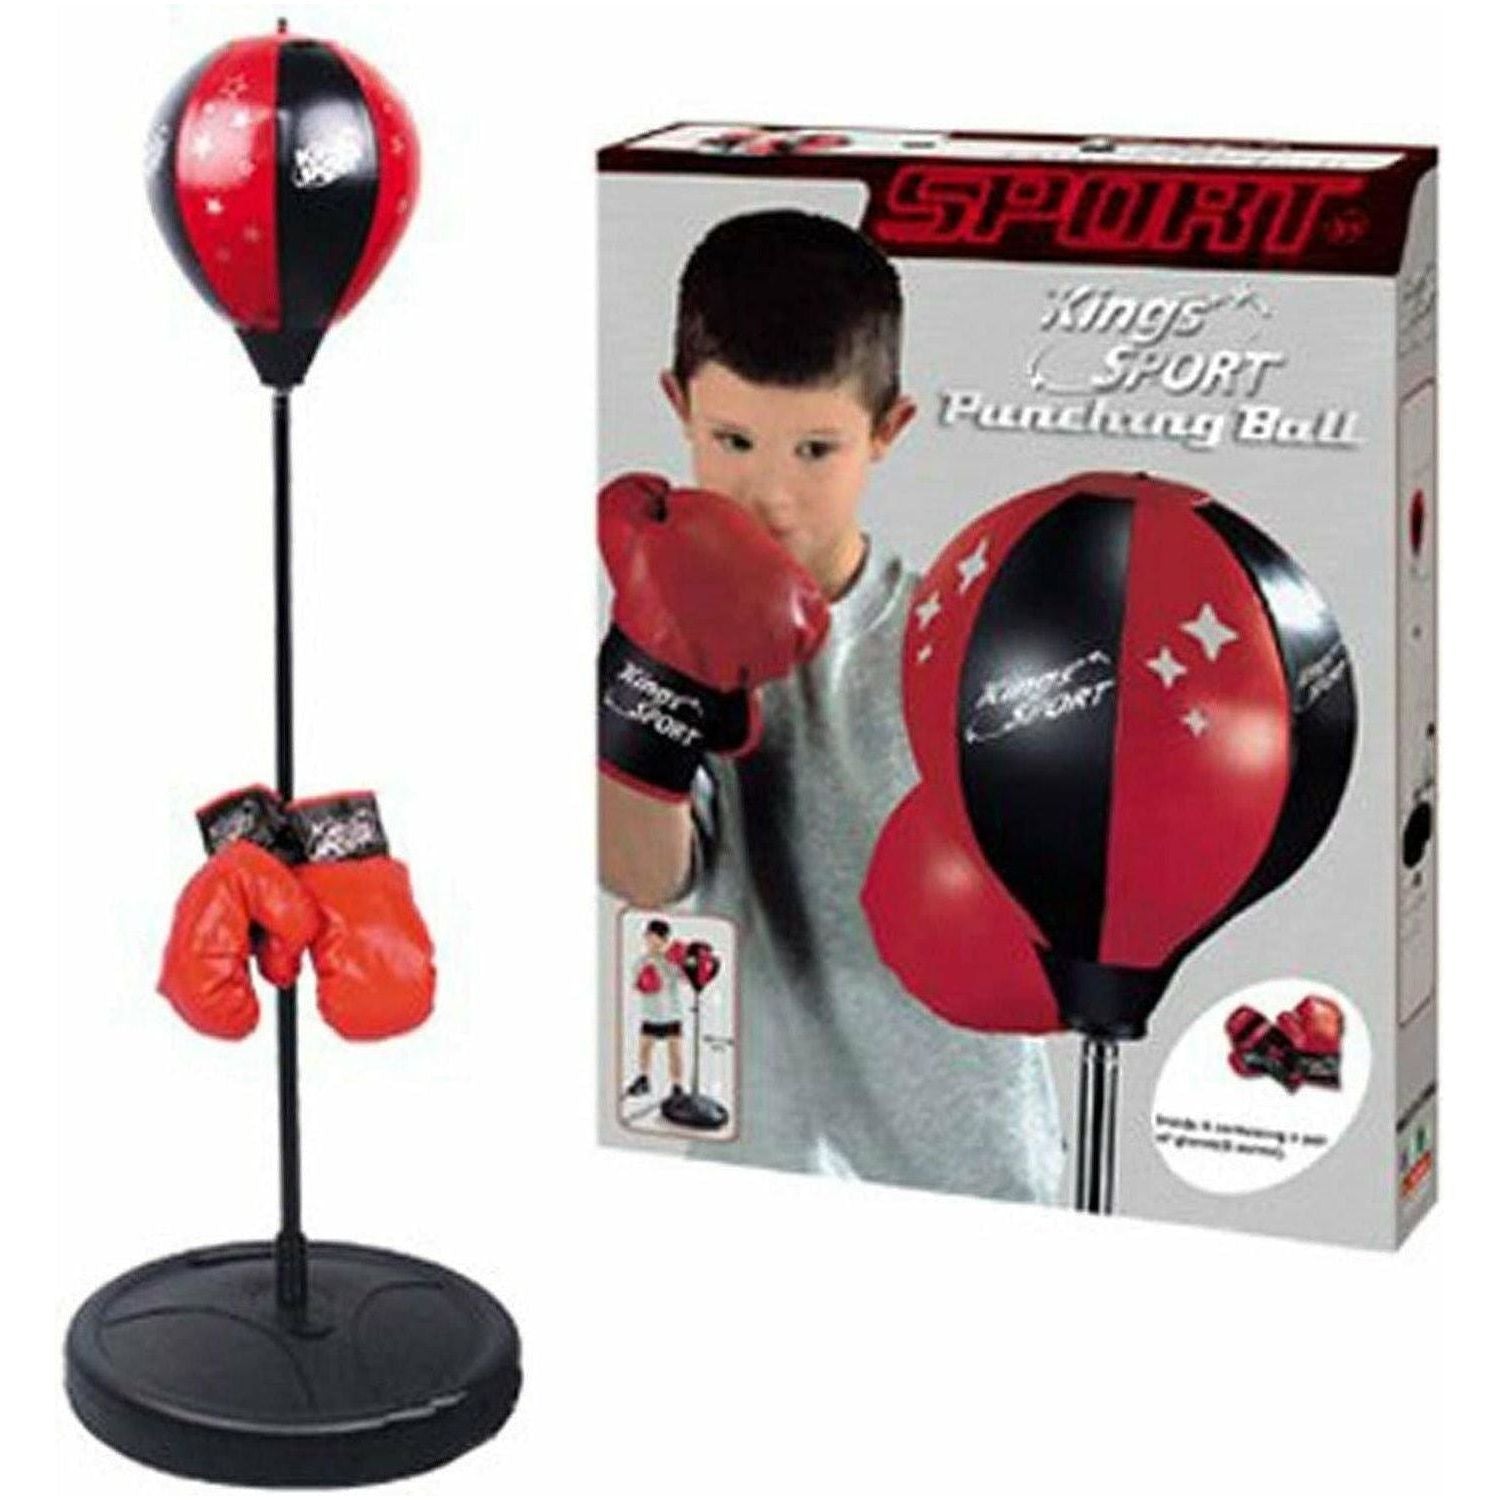 Kings Sport Boxing Punching Ball with Gloves - BumbleToys - 5-7 Years, Boys, Kids Sports & Balls, Toy House